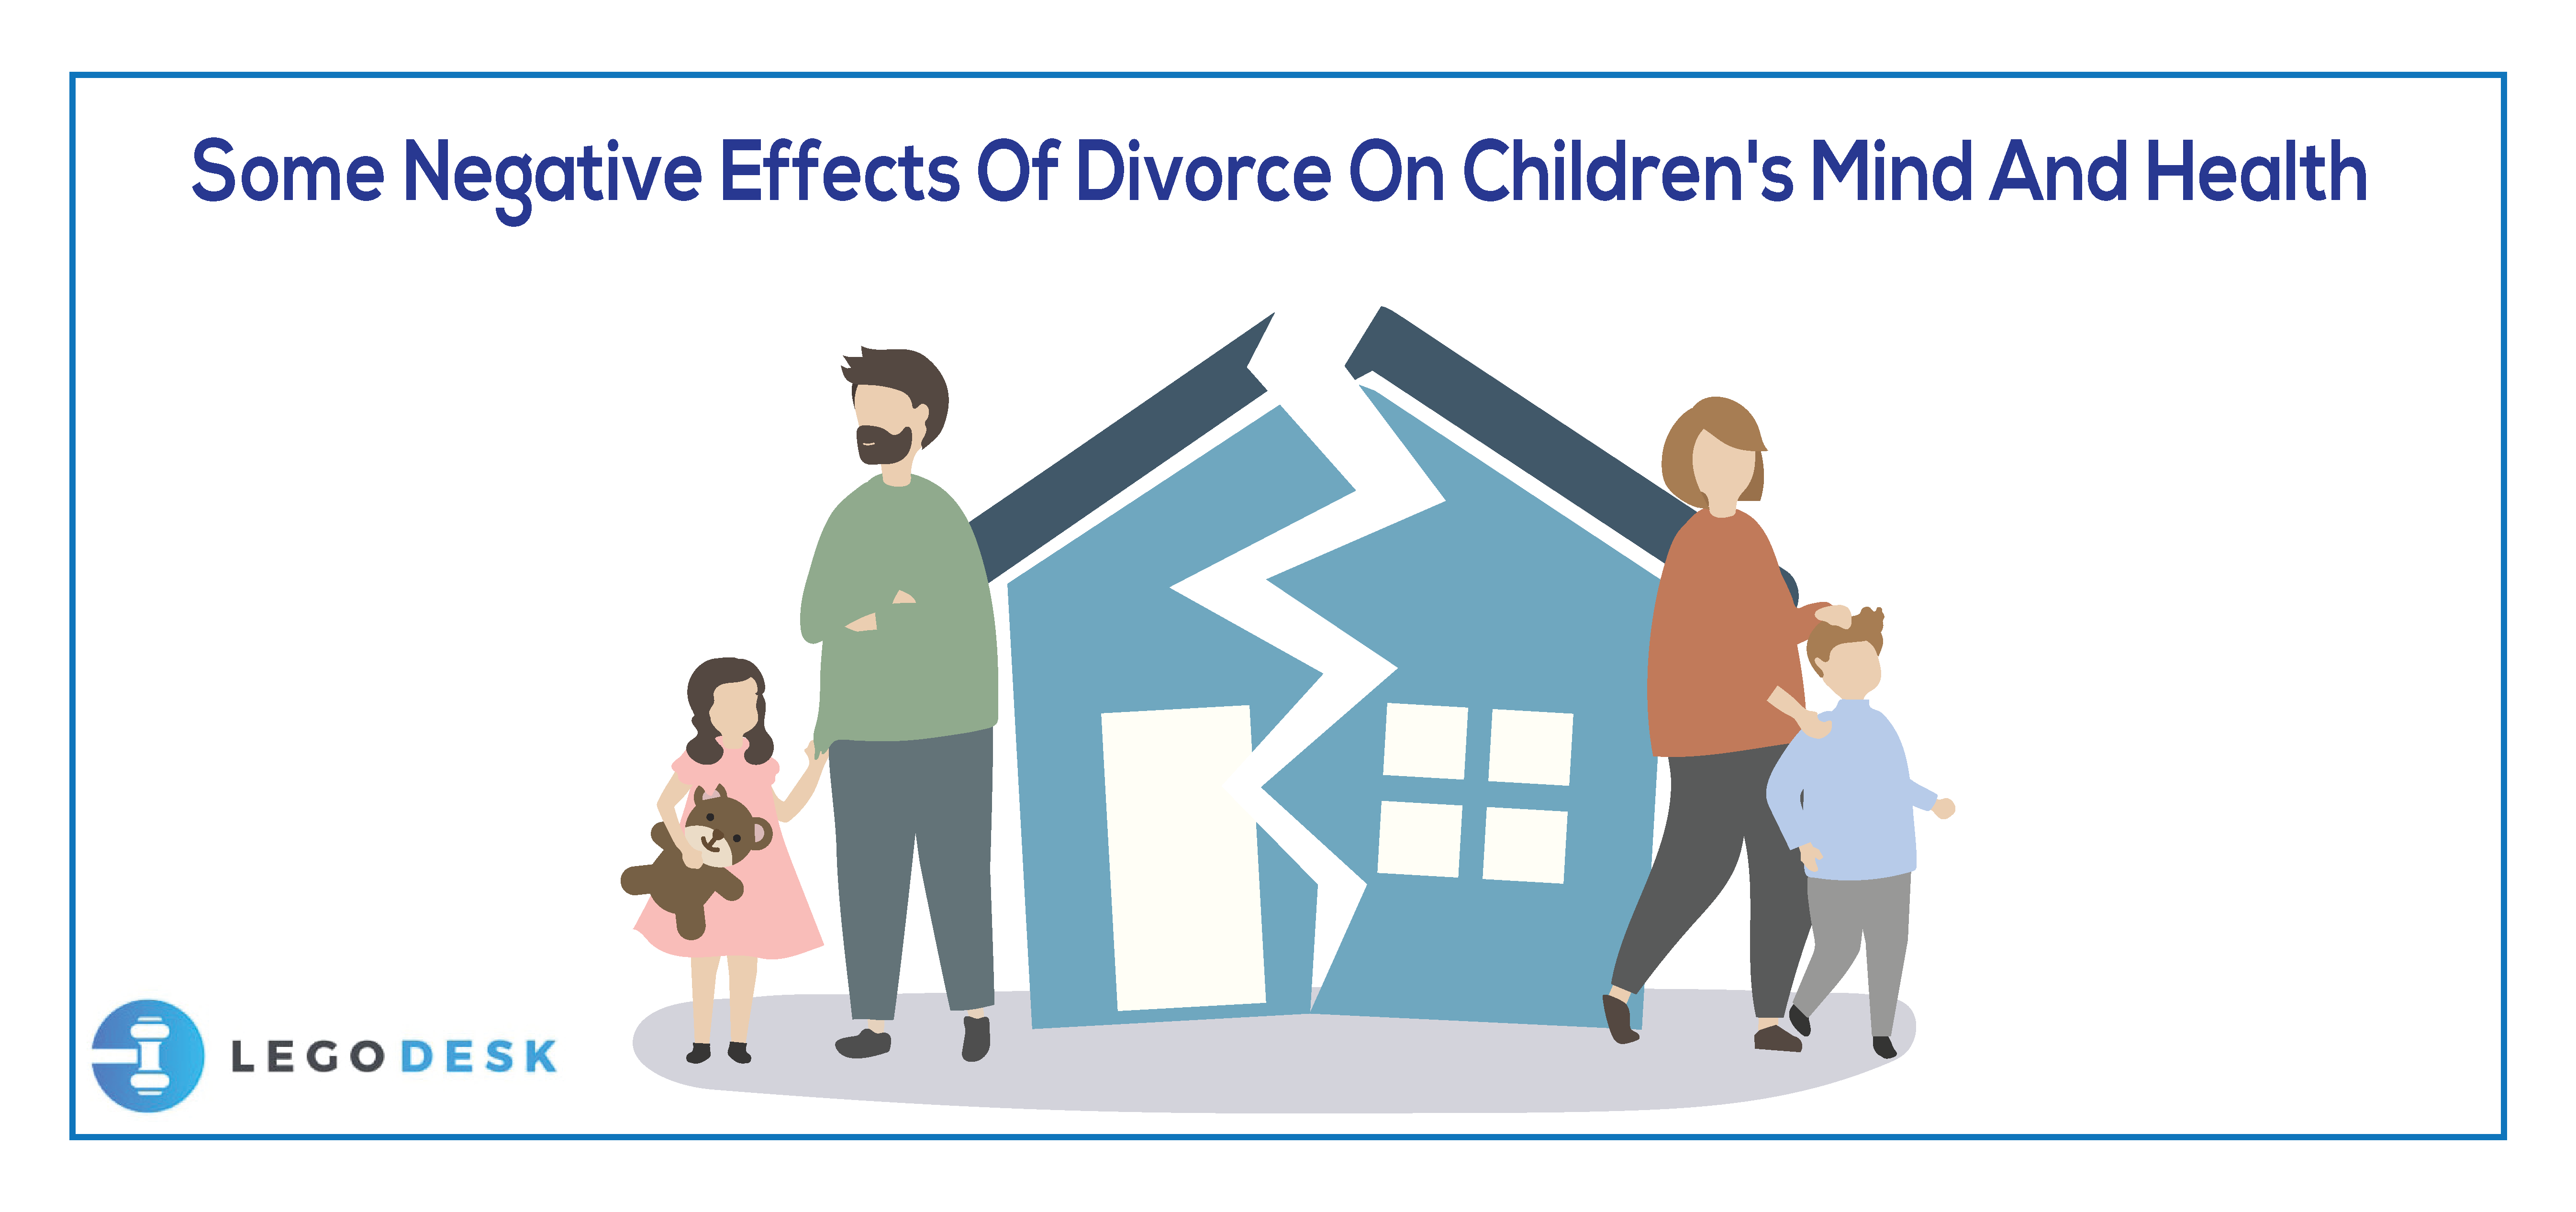 Negative Effects Of Divorce On Children’s Mind And Health  